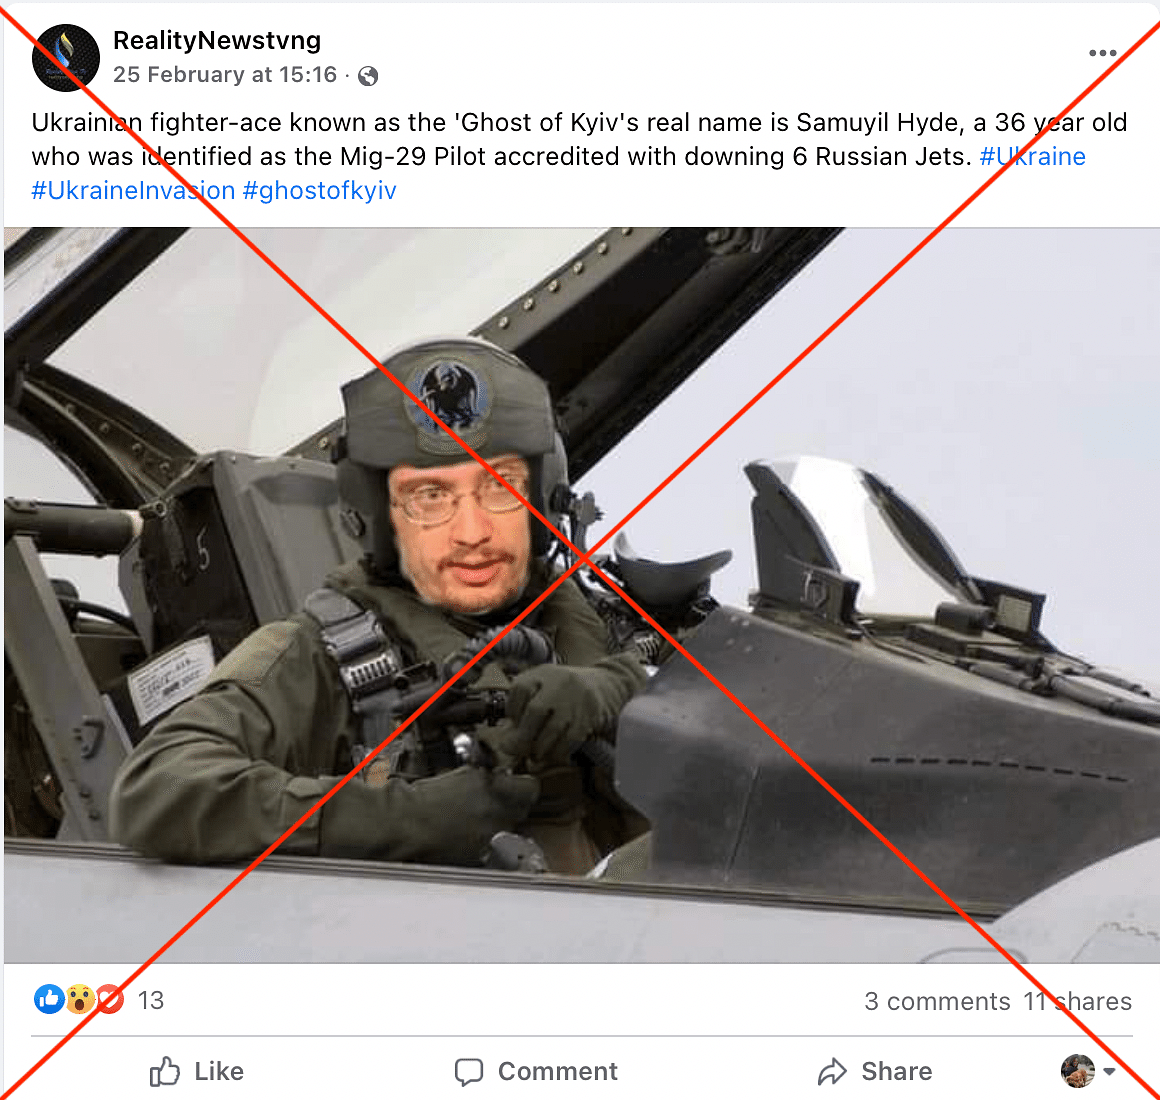 An American comic's photograph was edited onto a US Air Force pilot's photo to push the false claim.